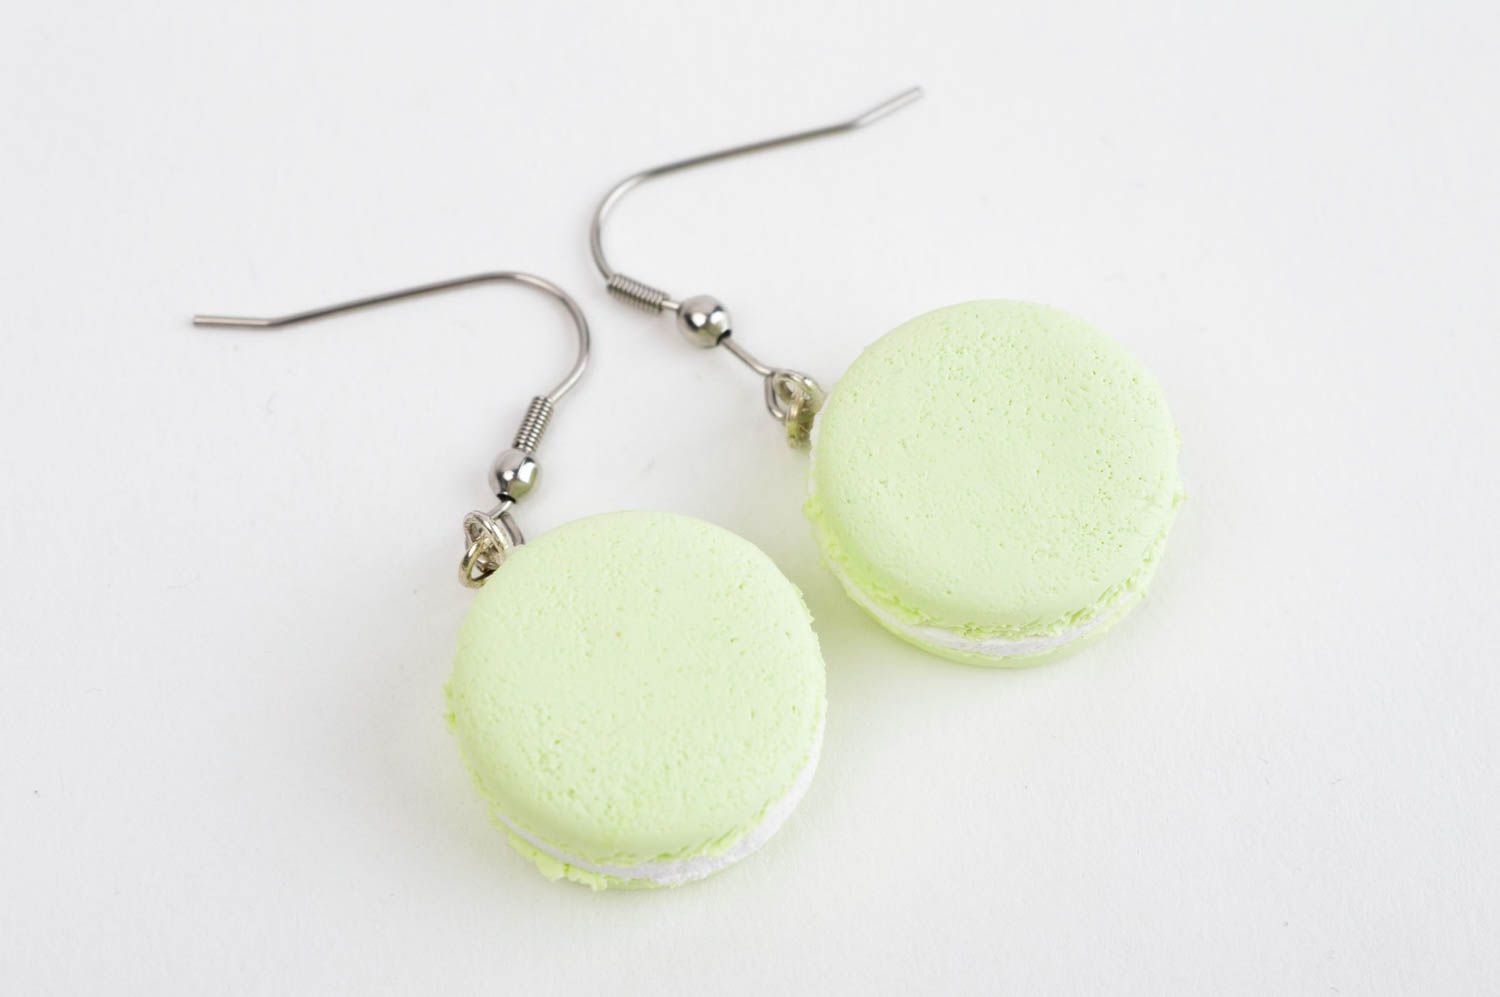 Handmade earrings designer accessory unusual jewelry clay earrings with charms photo 3